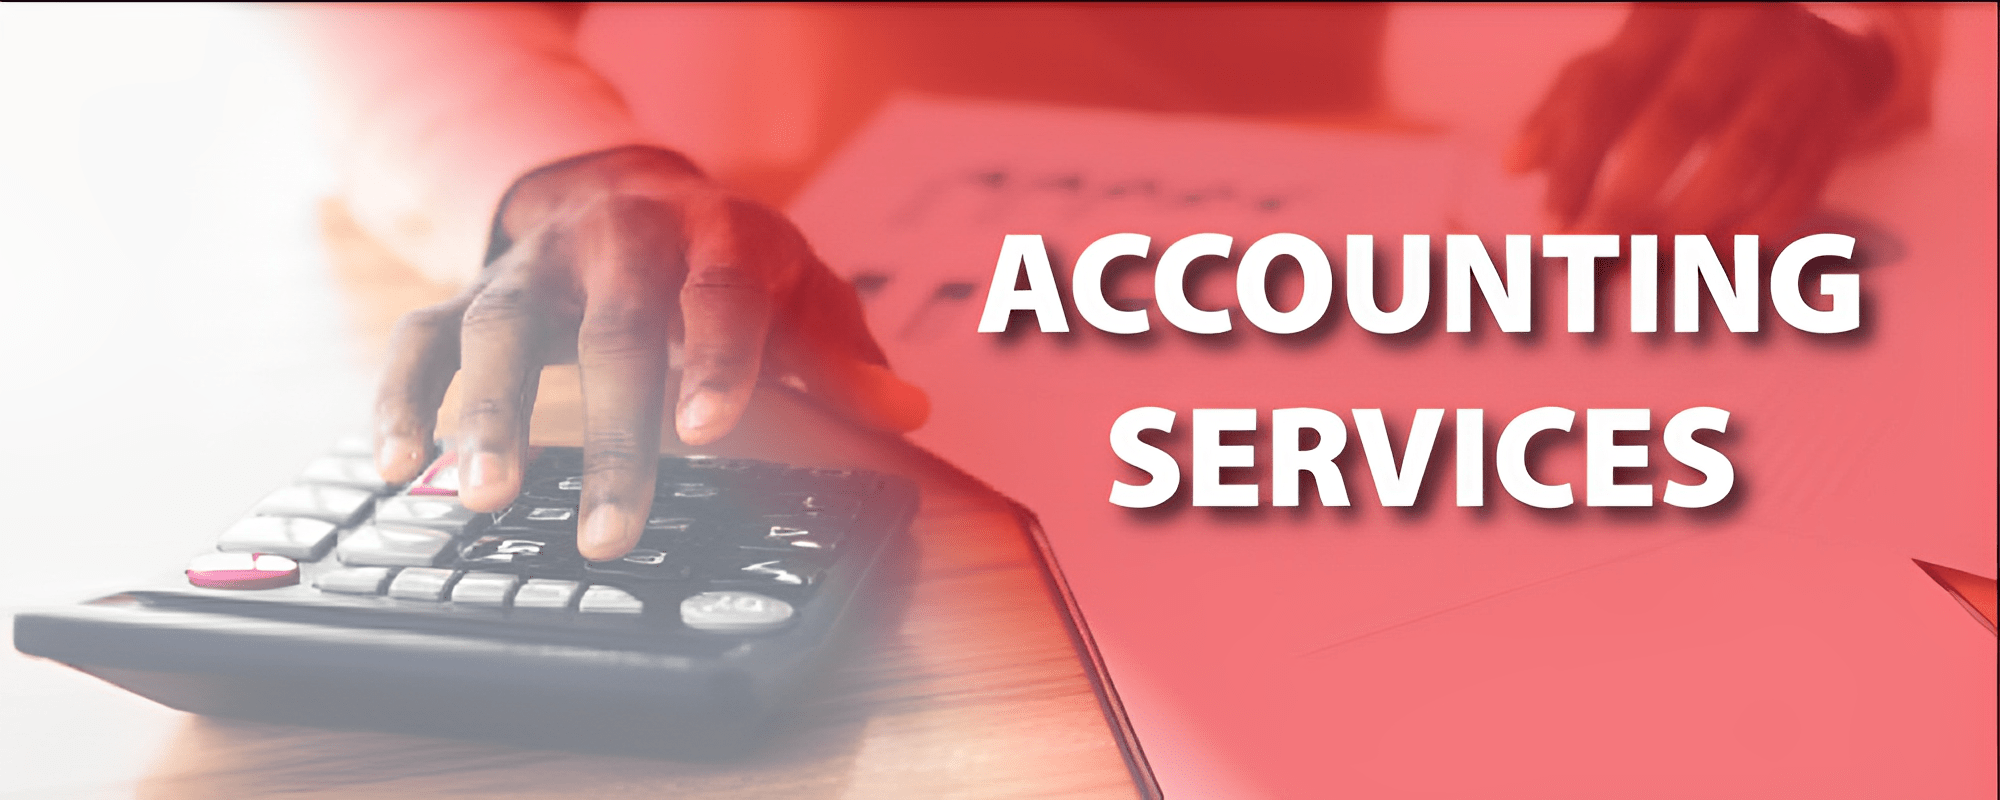 Accounting services in Uganda